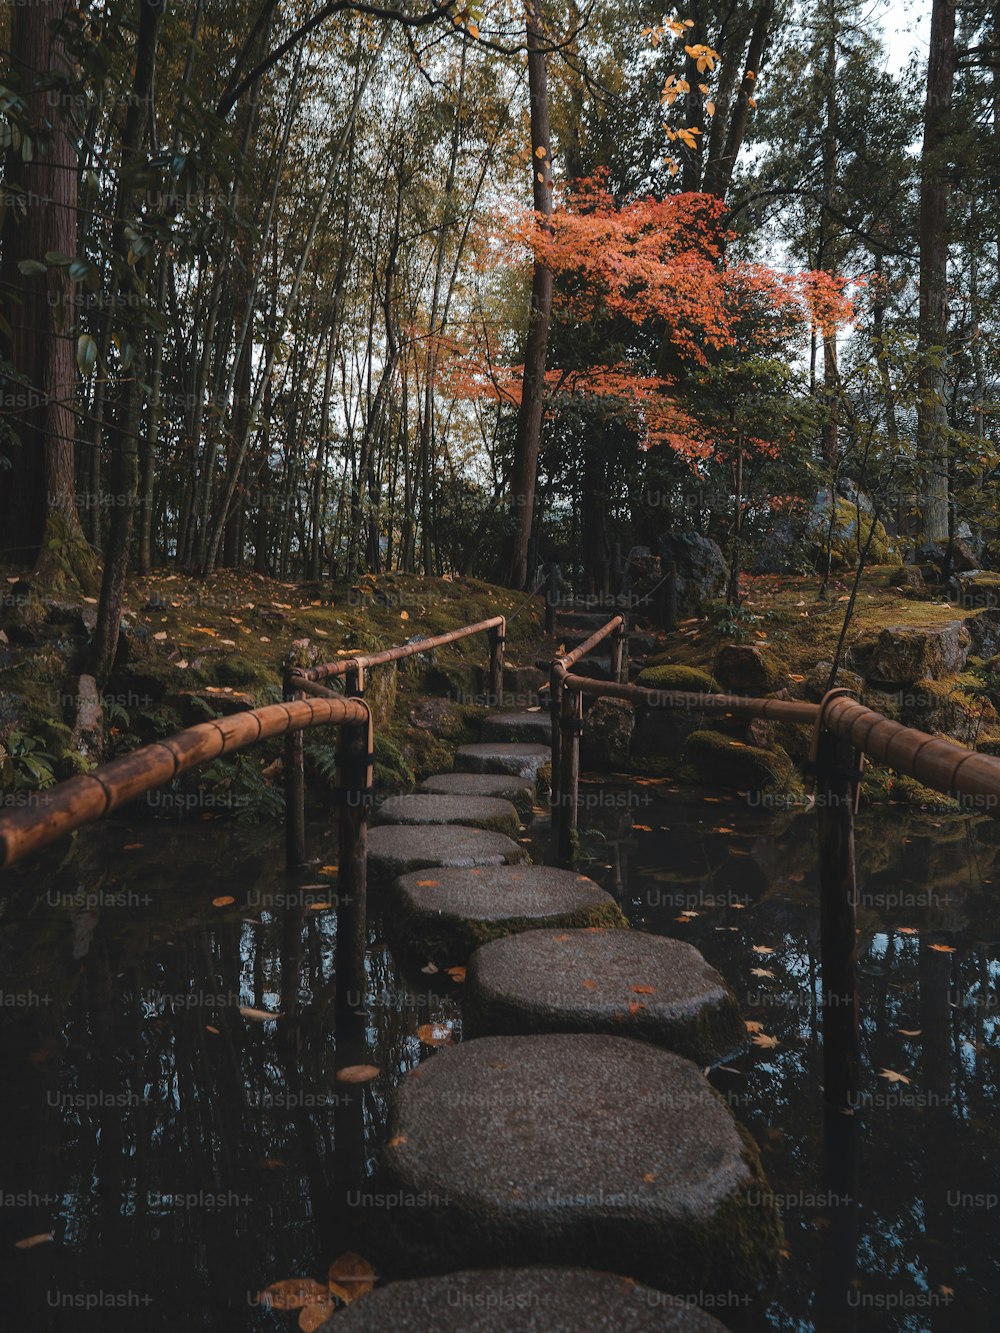 a path made of stepping stones in a forest